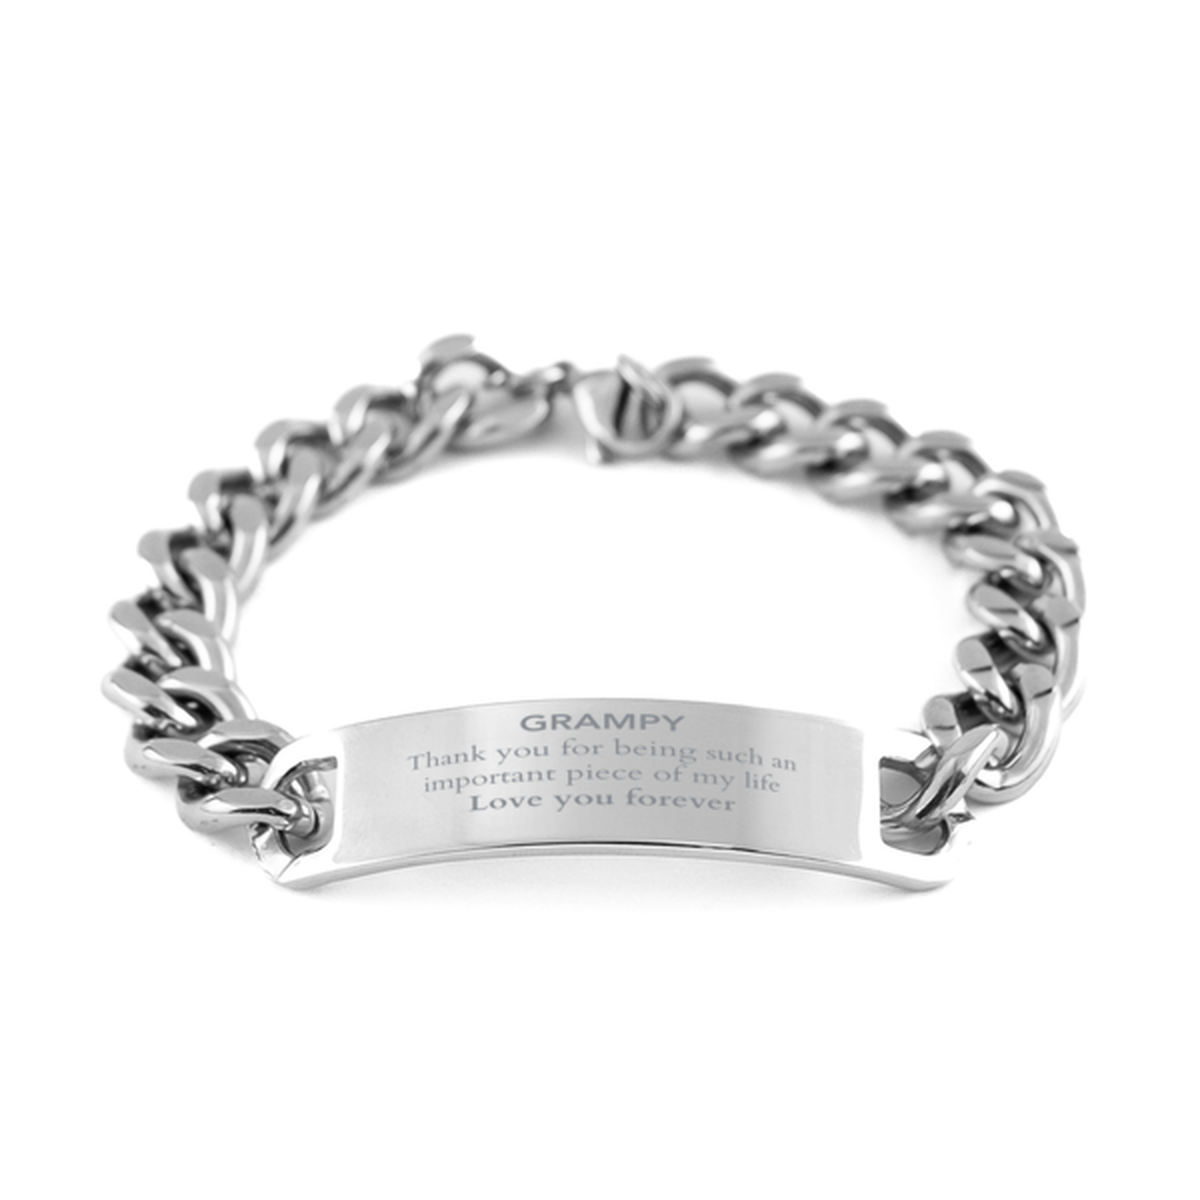 Appropriate Grampy Cuban Chain Stainless Steel Bracelet Epic Birthday Gifts for Grampy Thank you for being such an important piece of my life Grampy Christmas Mothers Fathers Day